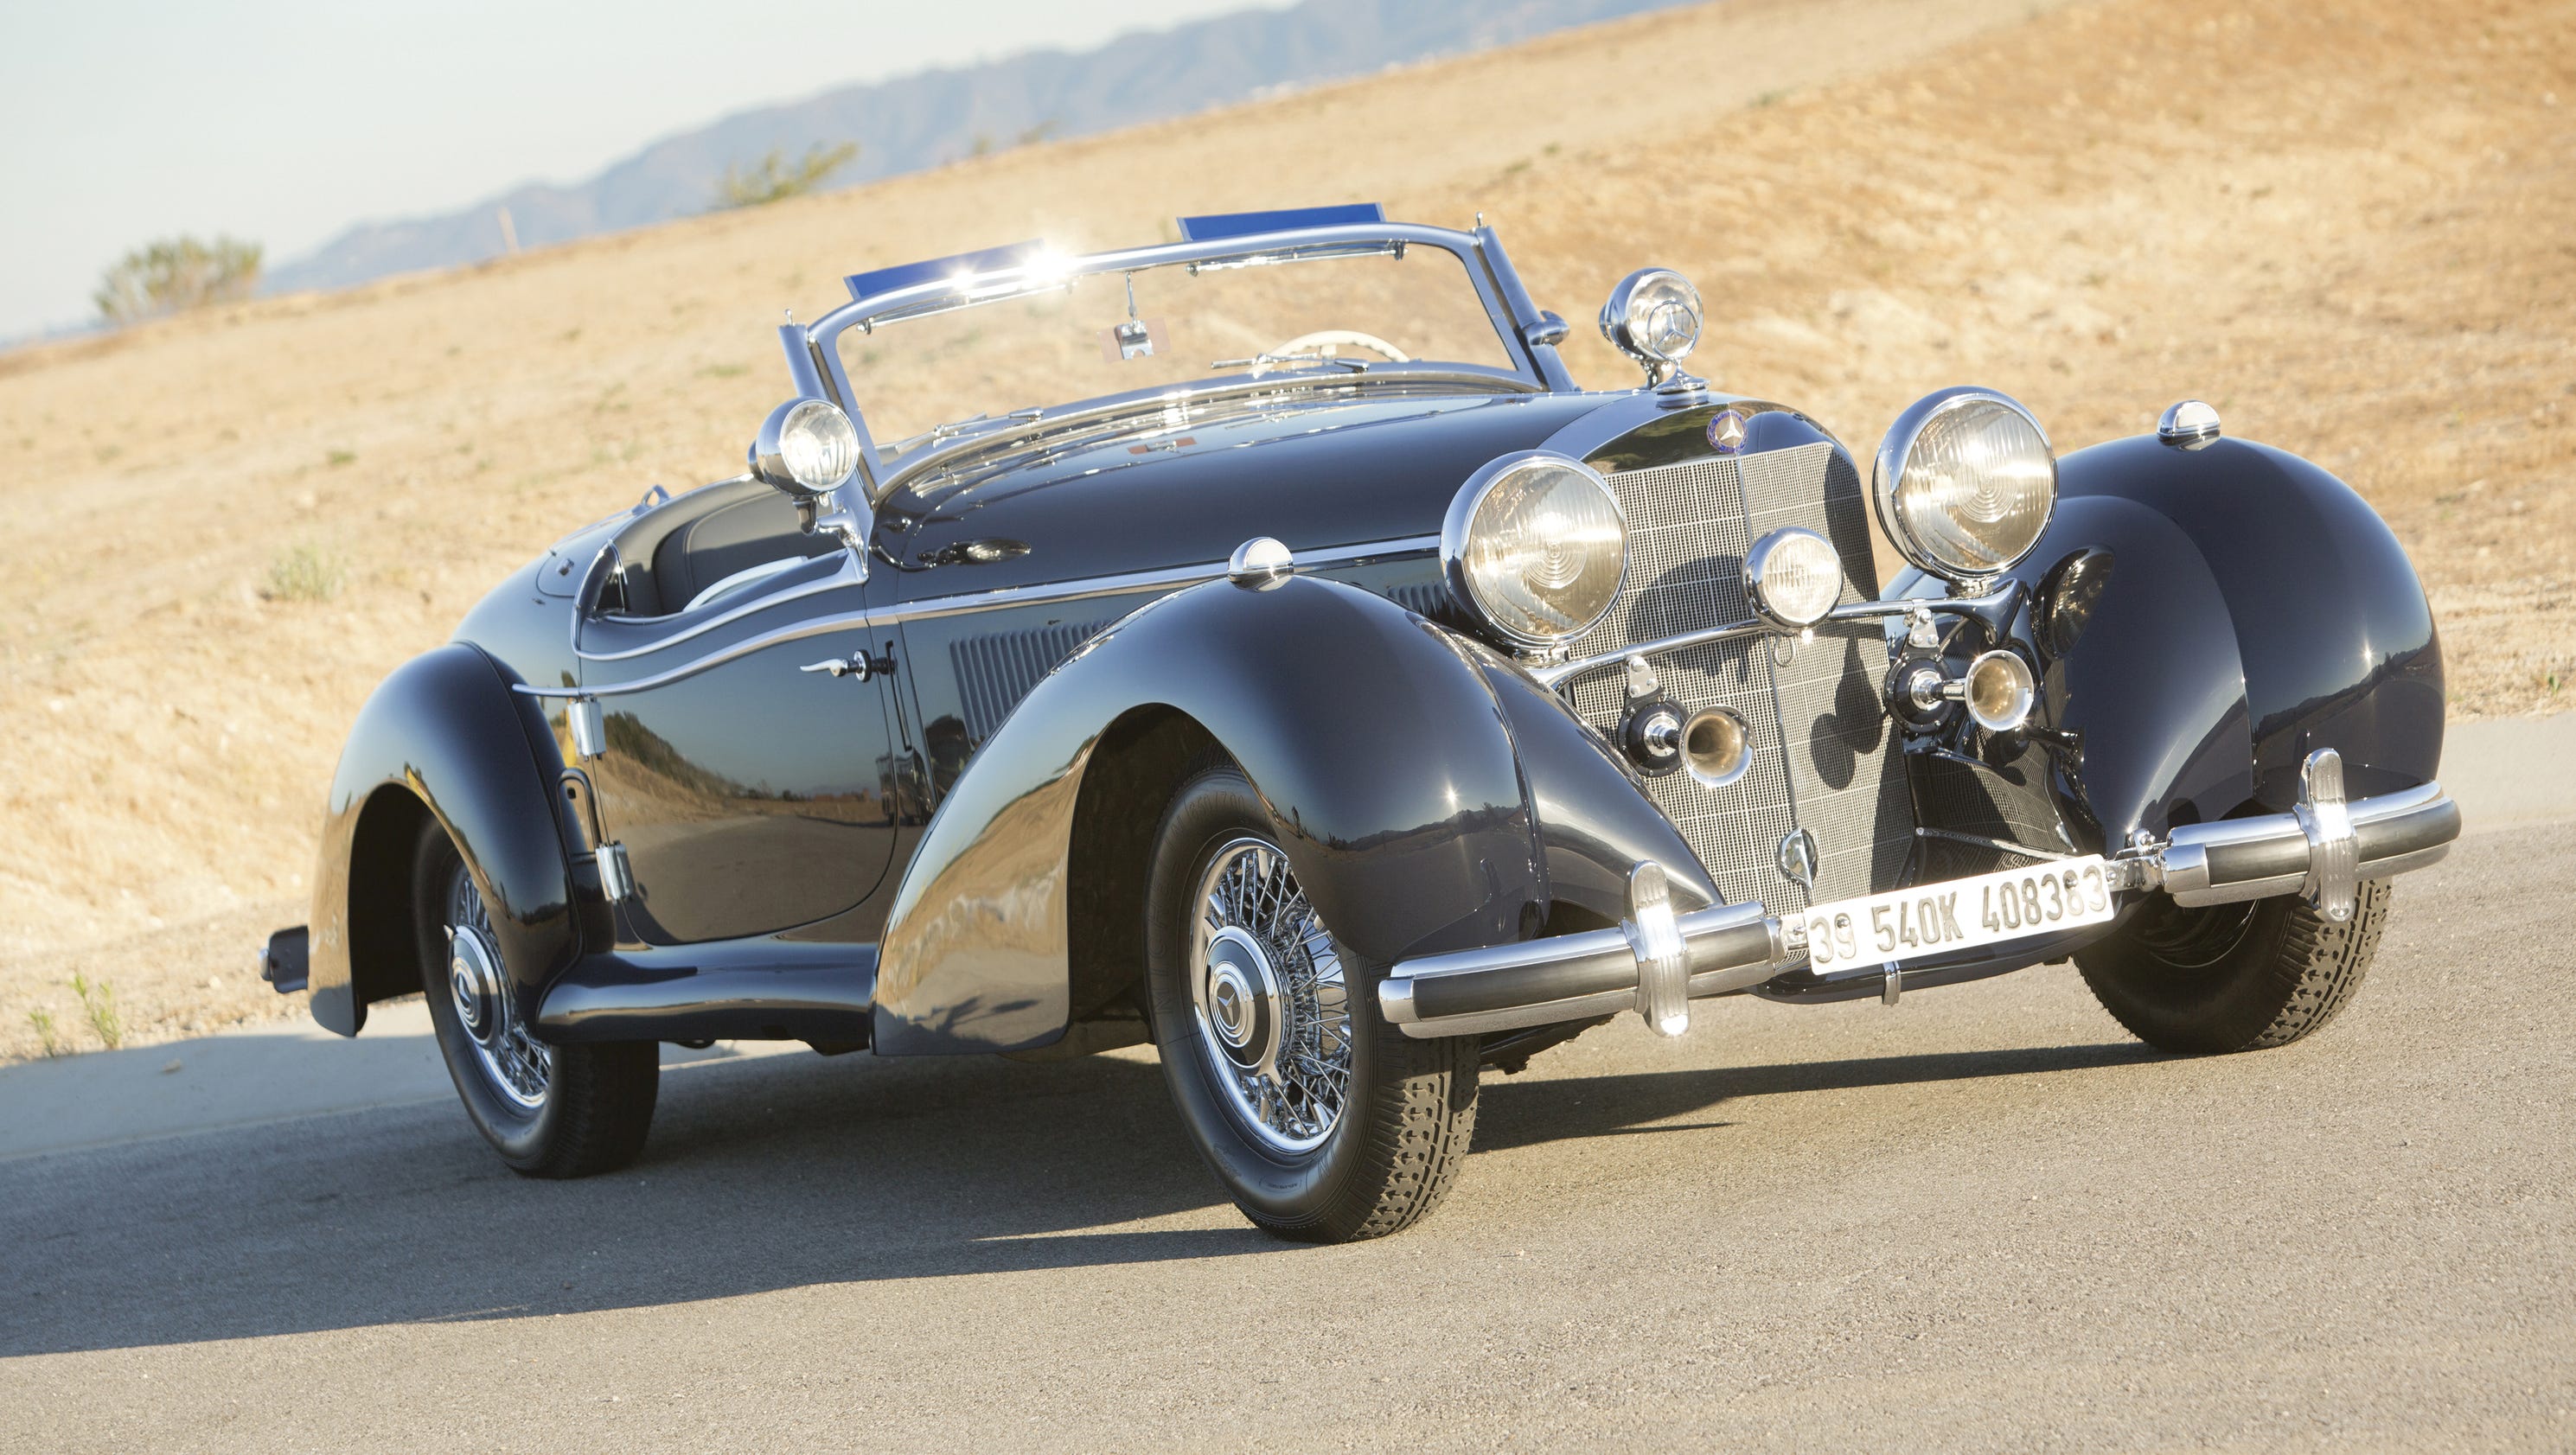 What kinds of cars are typically sold at RM Sotheby's classic car auctions?